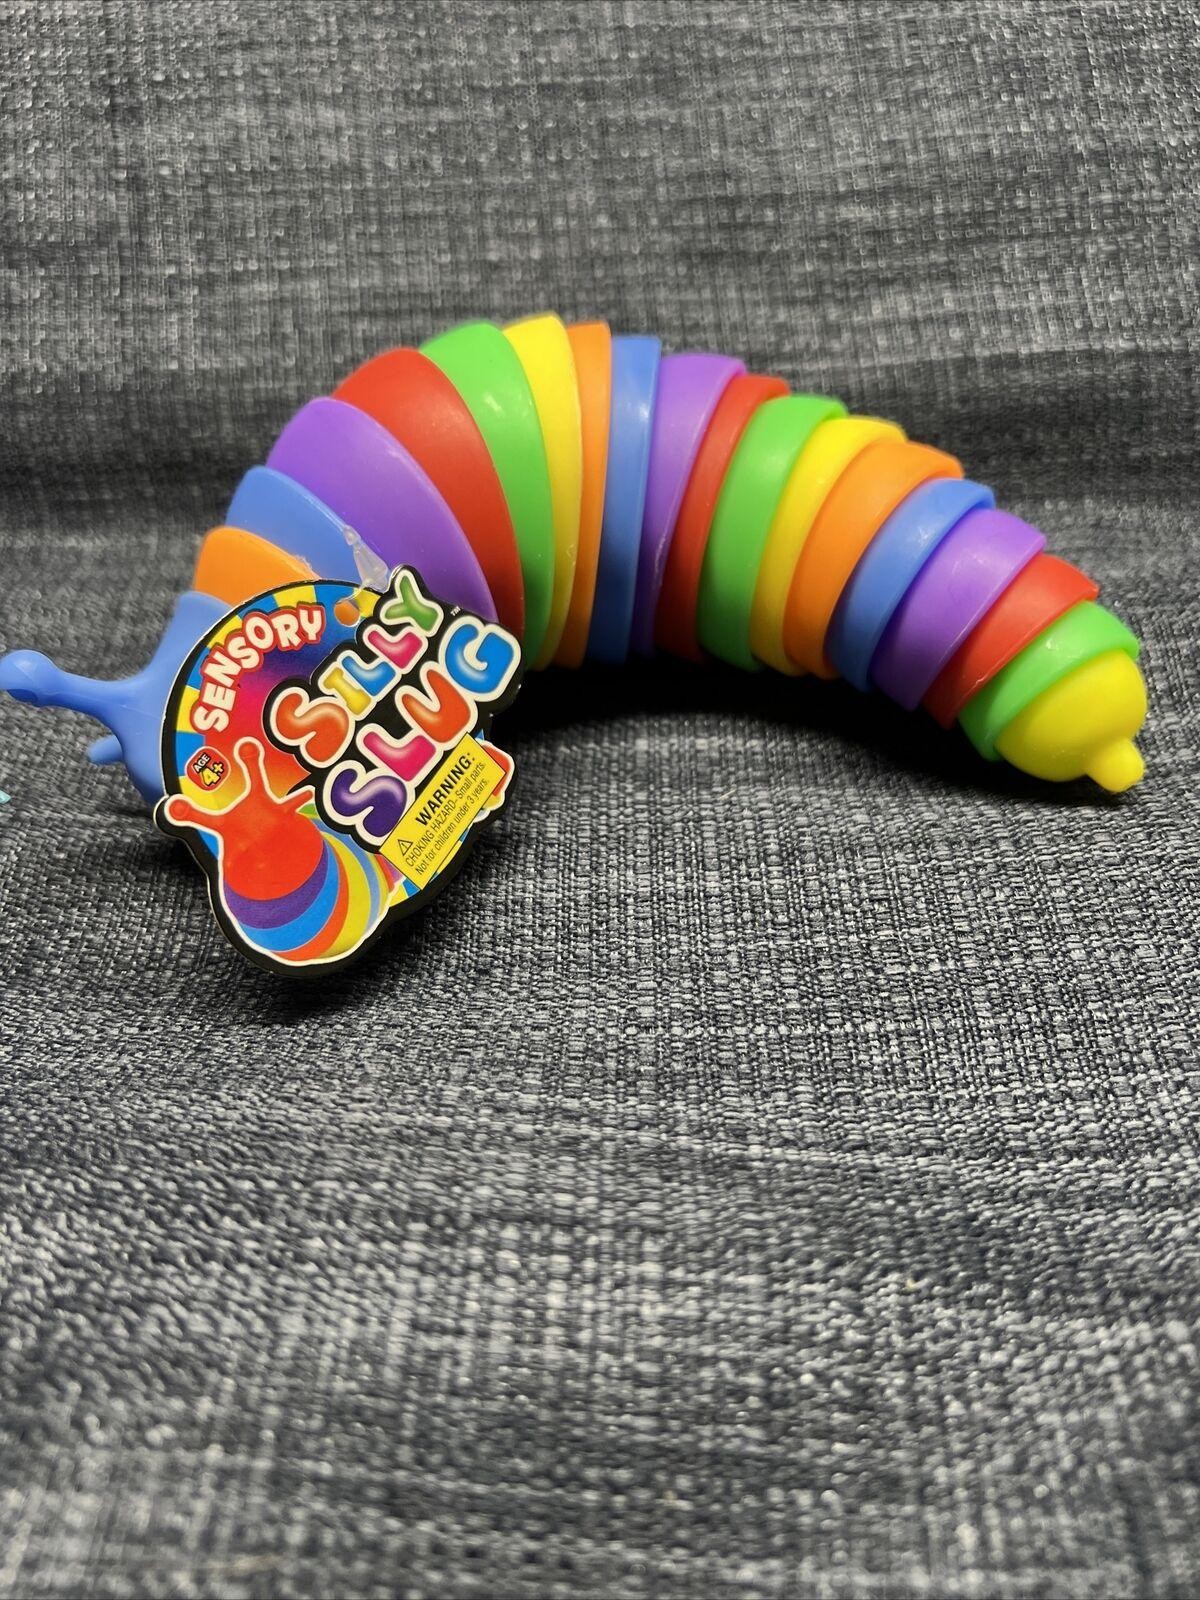 Jaru Sensory Silly Slug - 7 Inches  Tactile Stretch Toy  Colorful and Fun  Ideal for Stress Relief